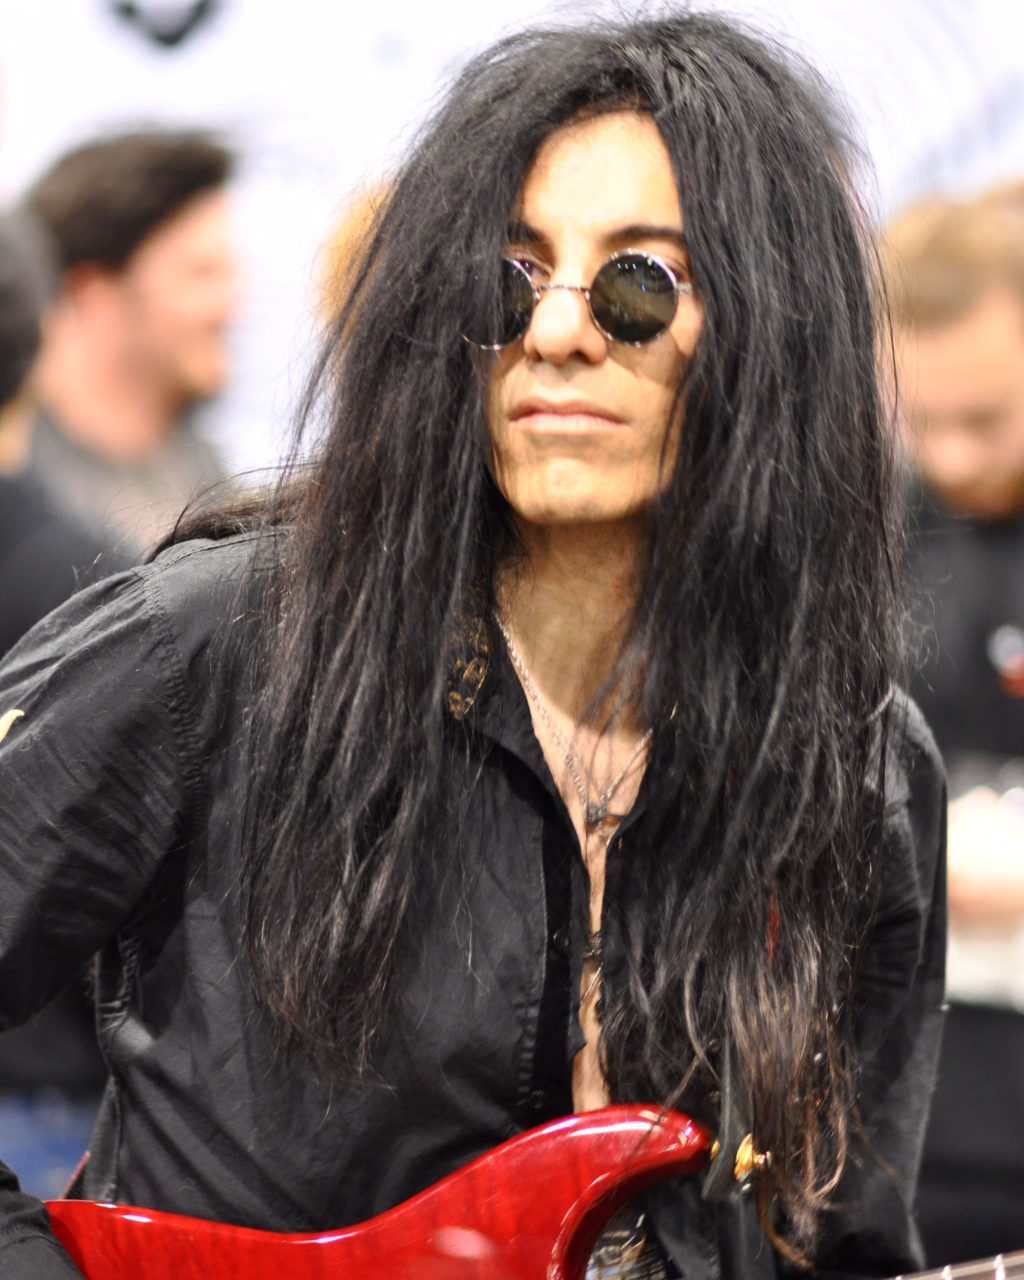 Mike Campese NAMM 2019, Anderson Guitars.